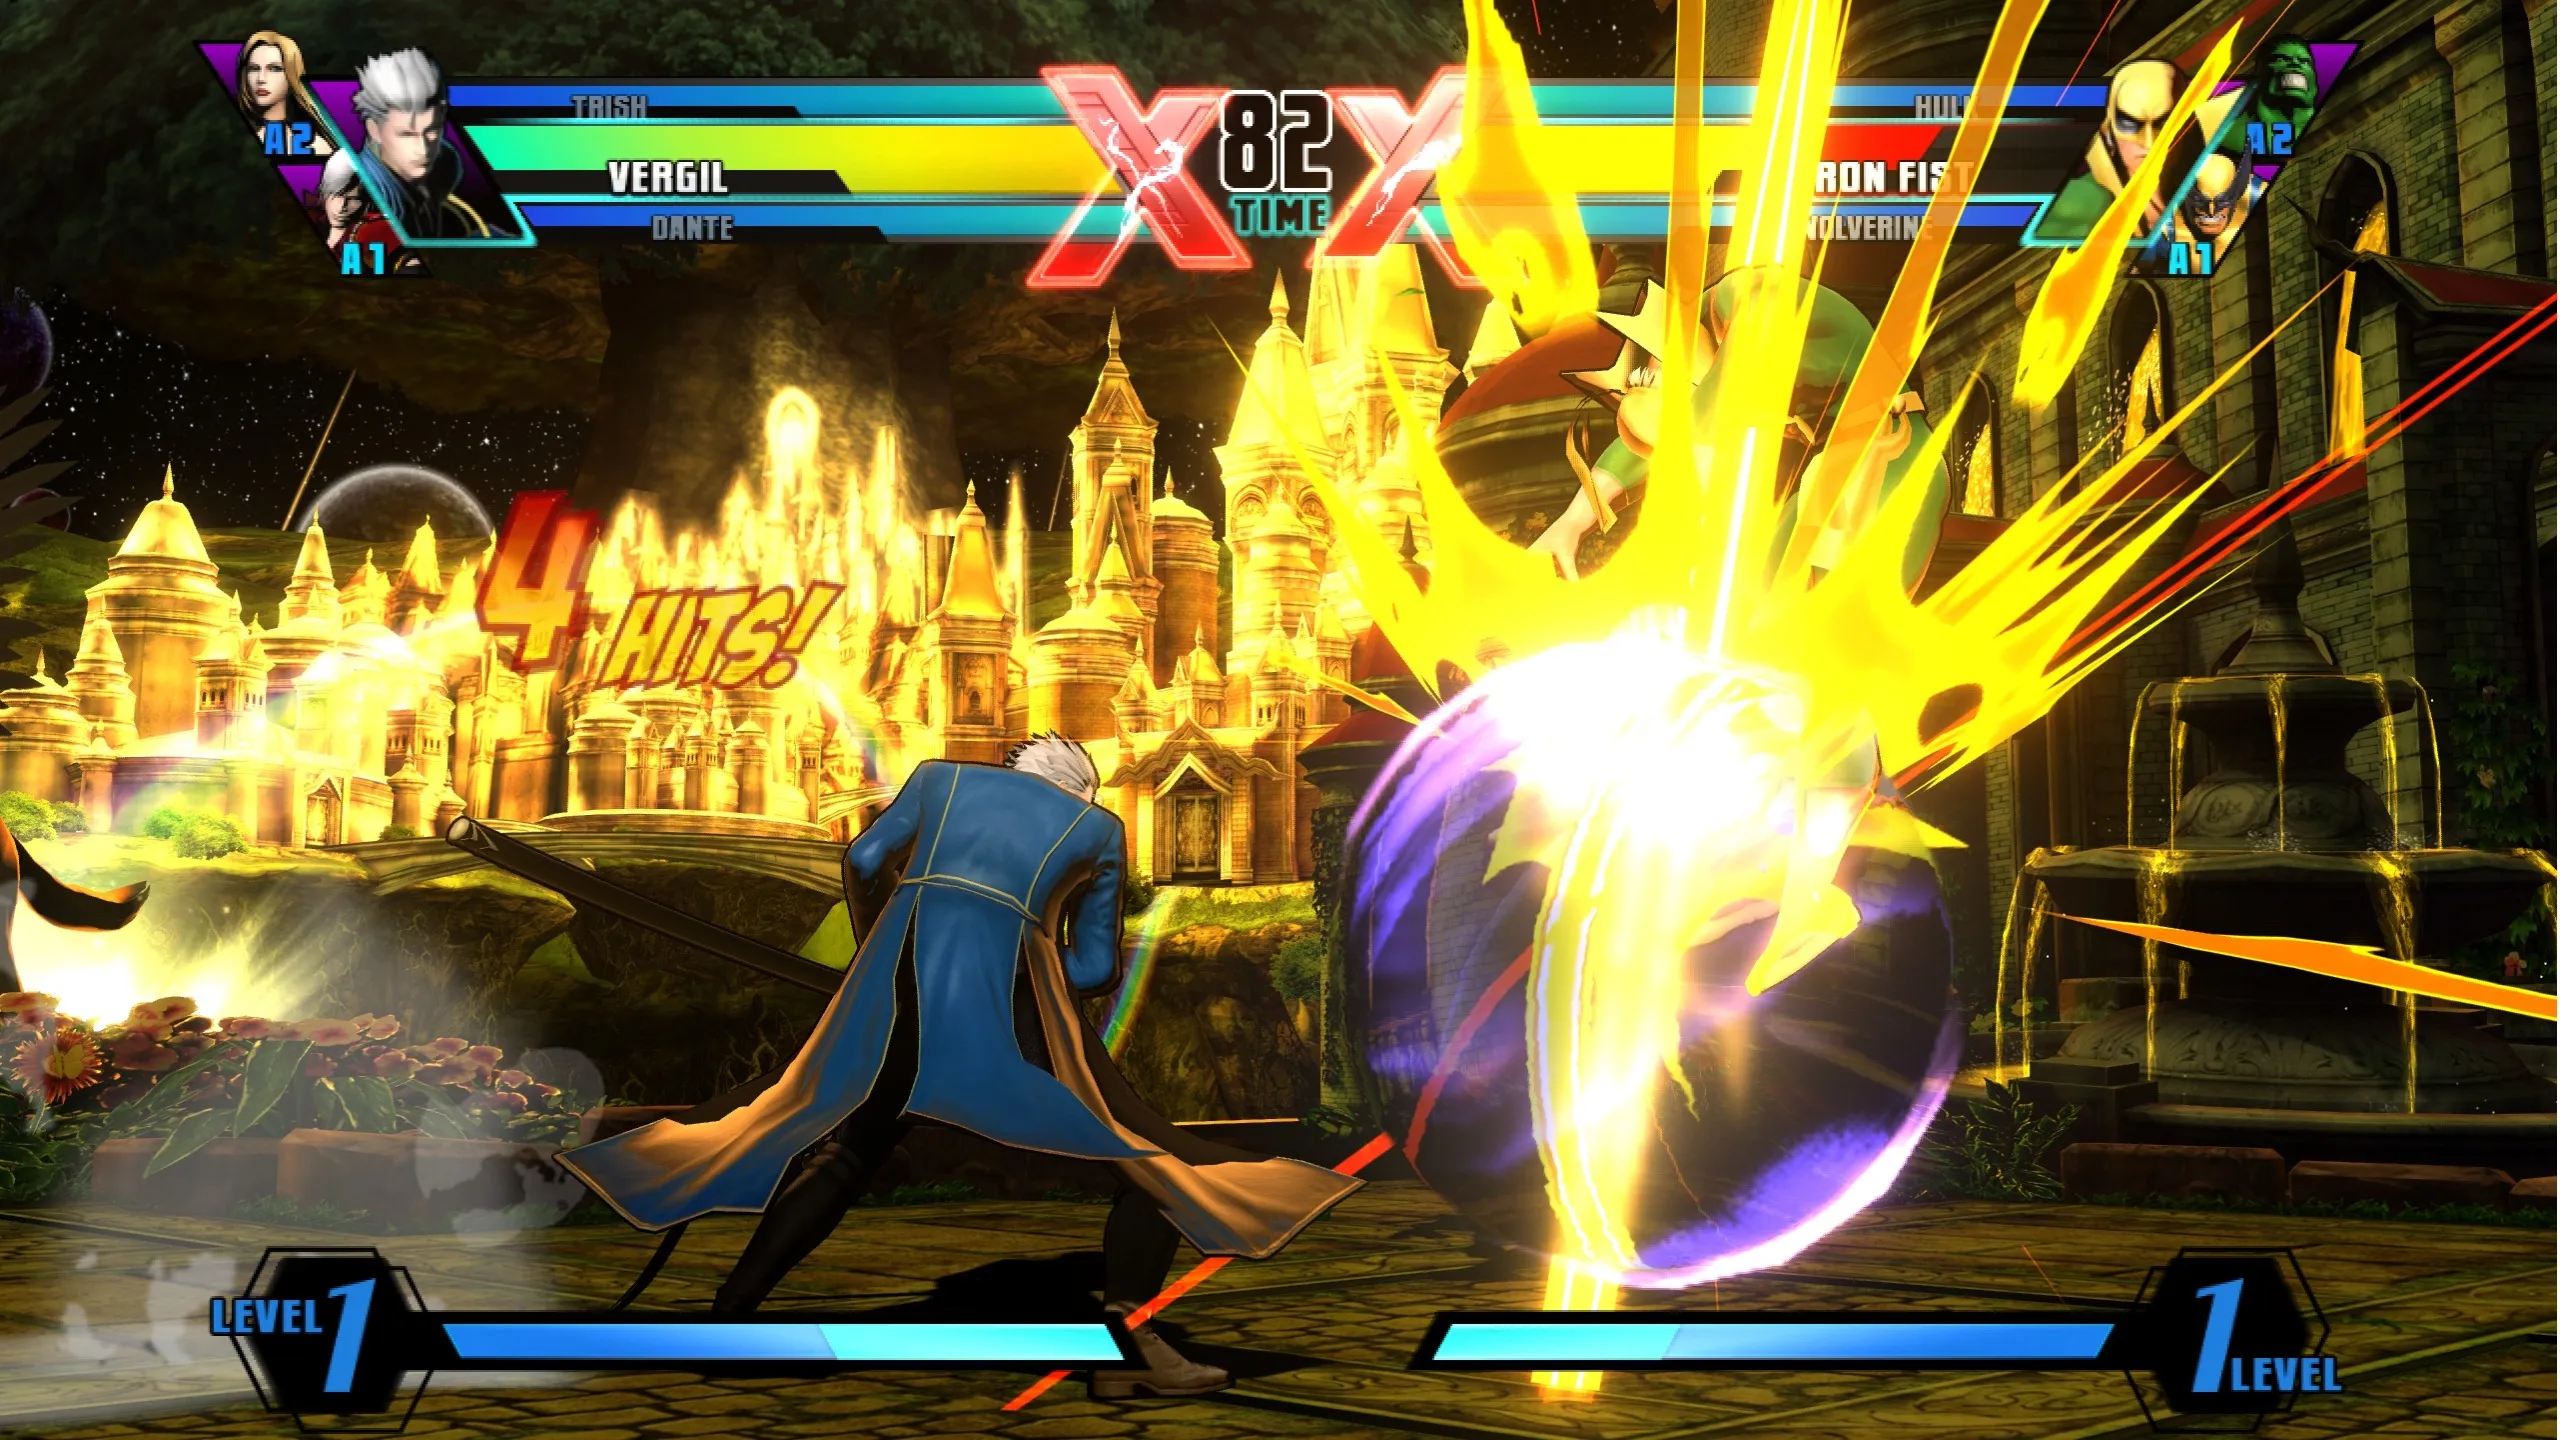 Who's even more powerful than Vergil in Ultimate Marvel vs. Capcom